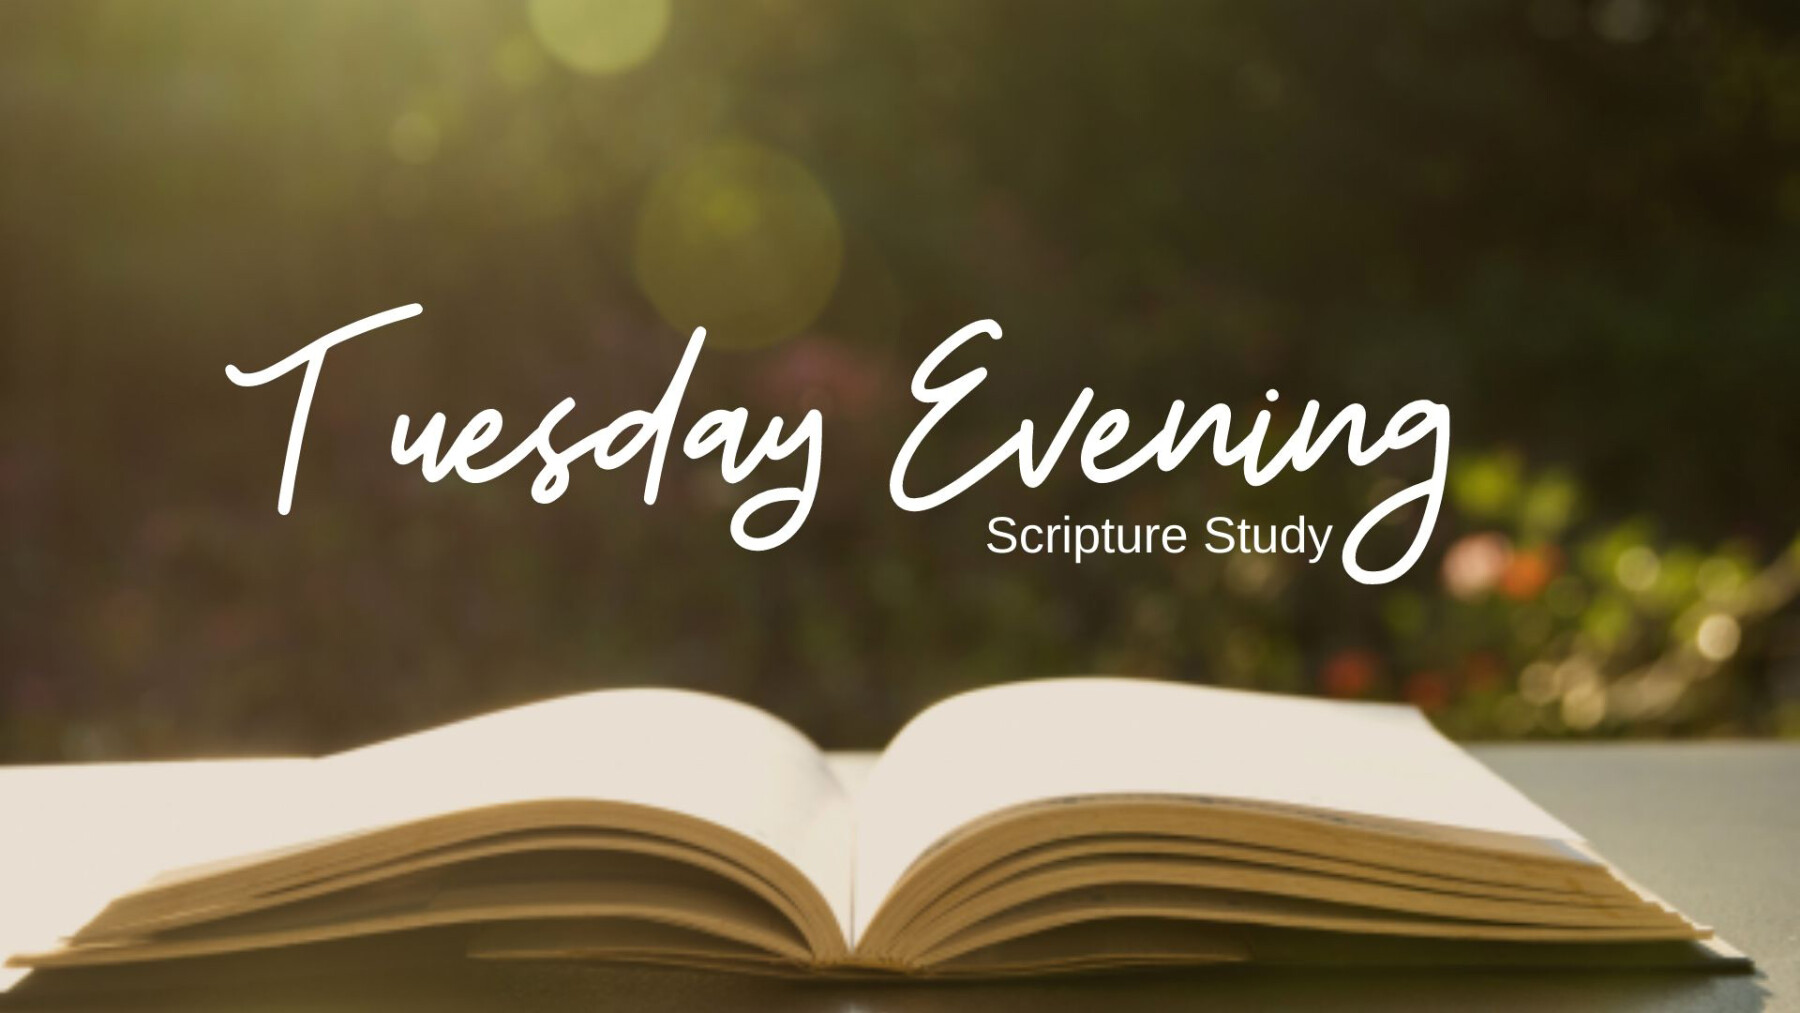 Tuesday Evening Scripture Study